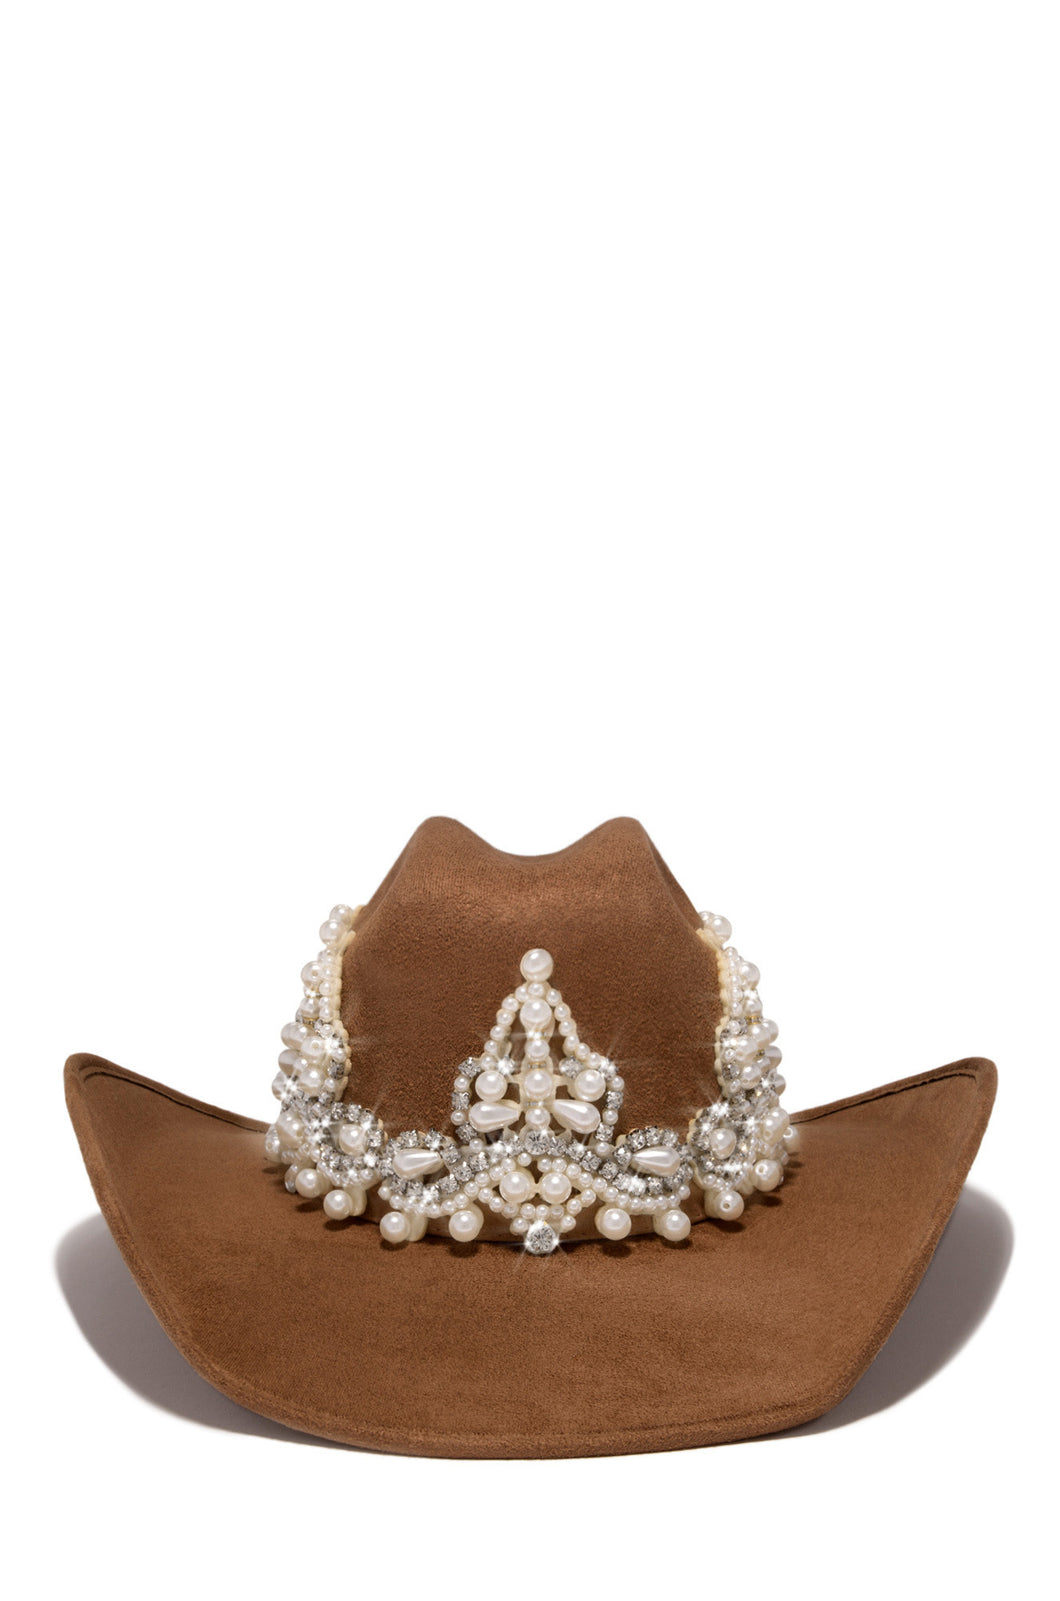 Brown Western Hat with Pearl and Stone Embellishments